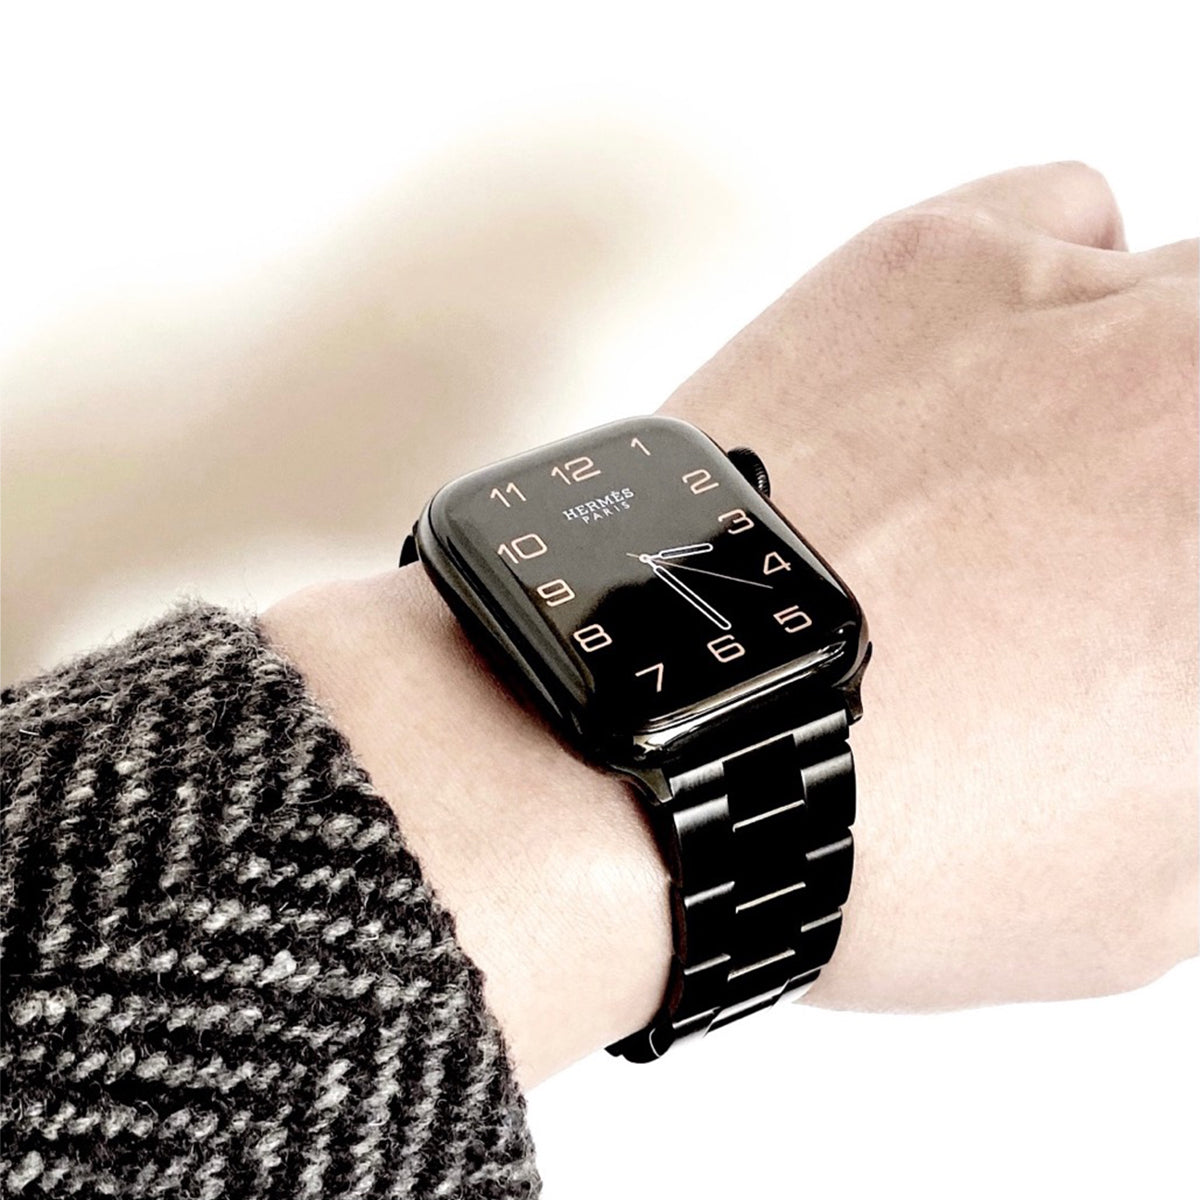 Apple Watch stainless steel band (Oyster type / BLACK)